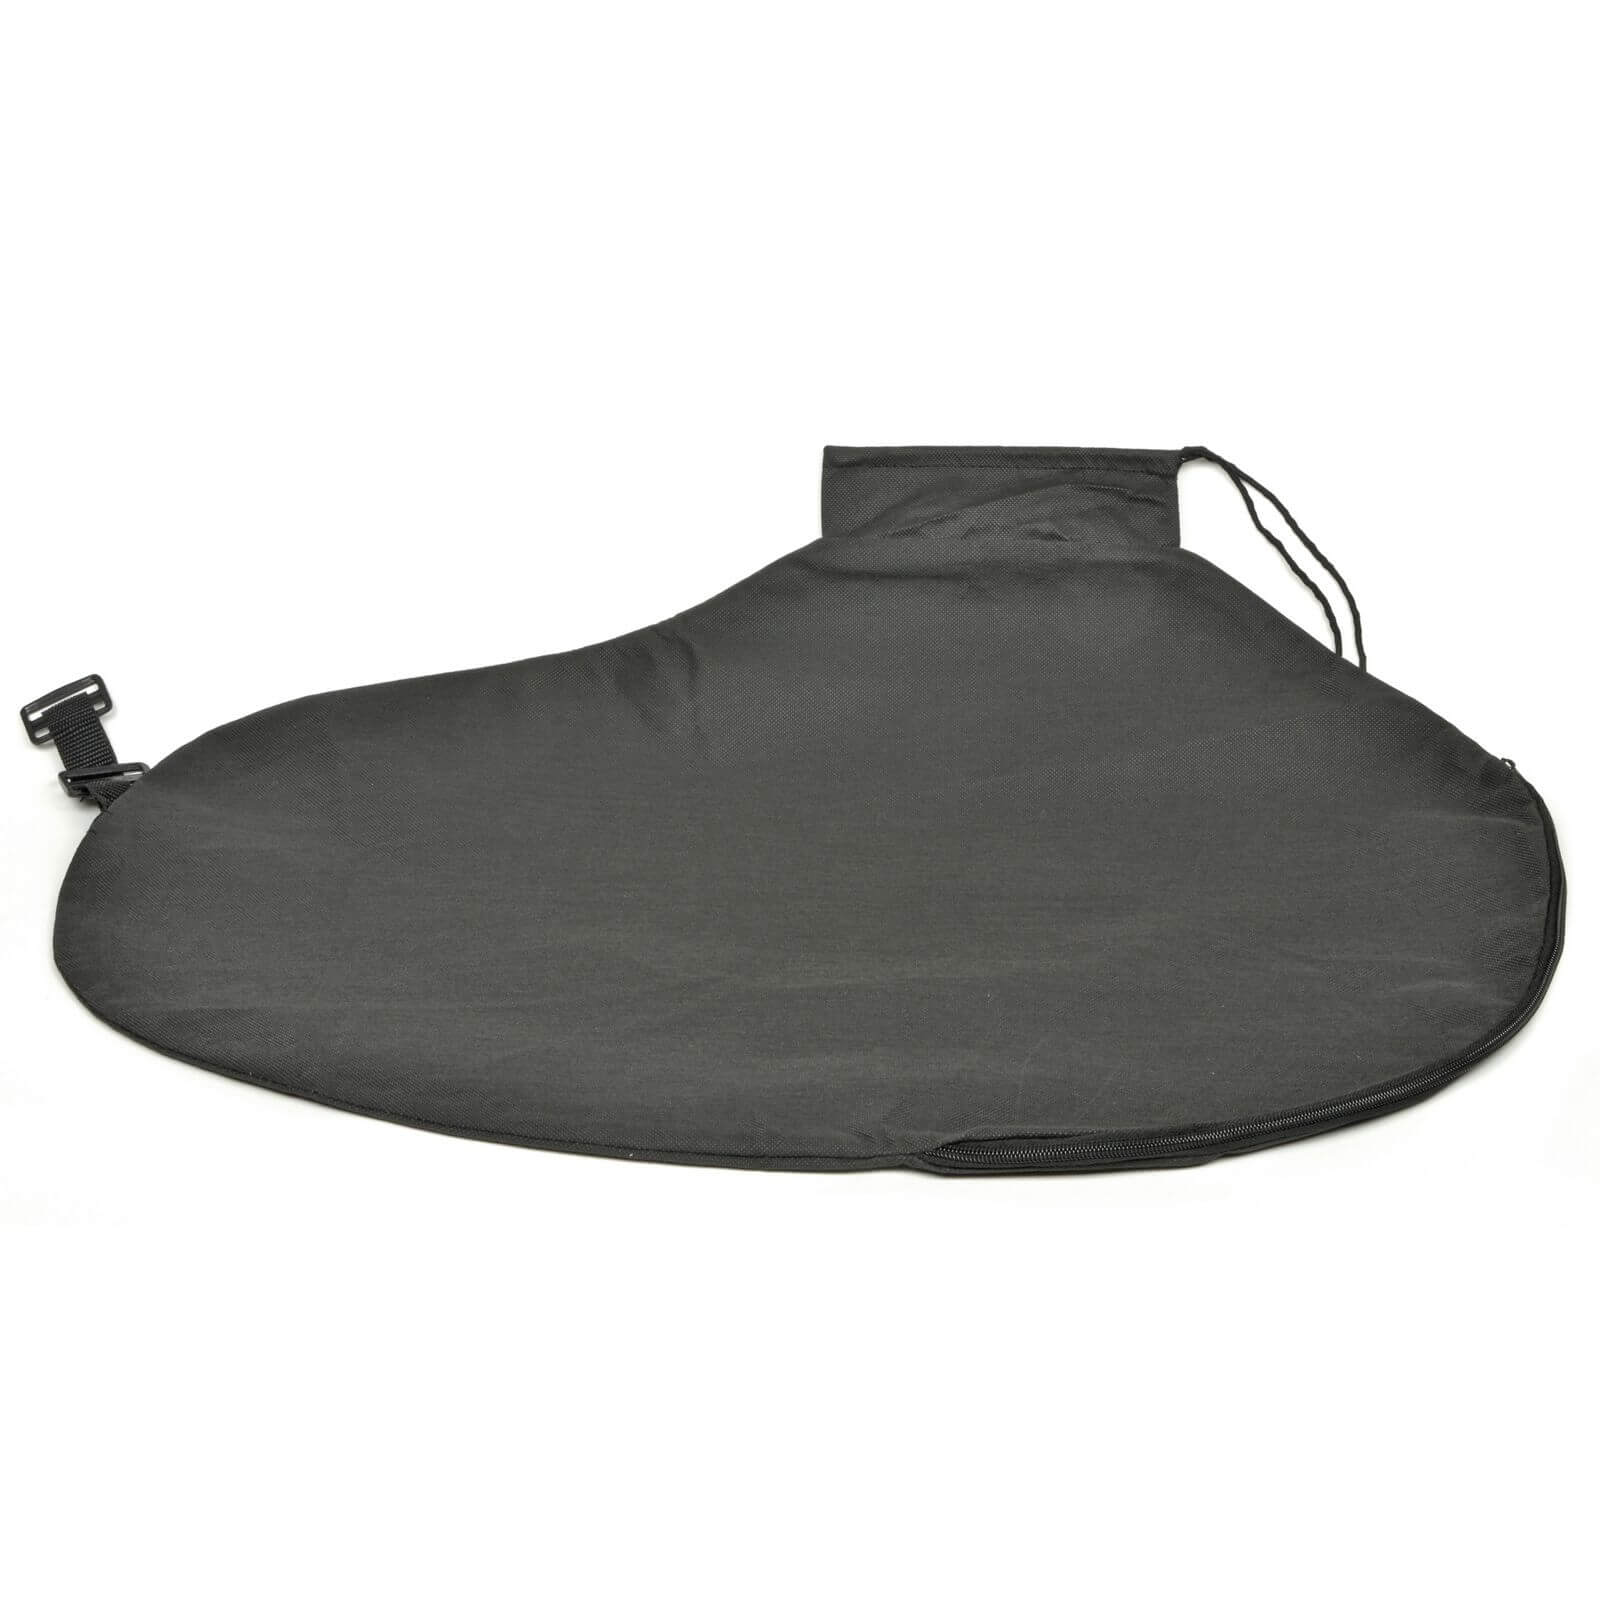 ALM Replacement Vac Bag for Qualcast